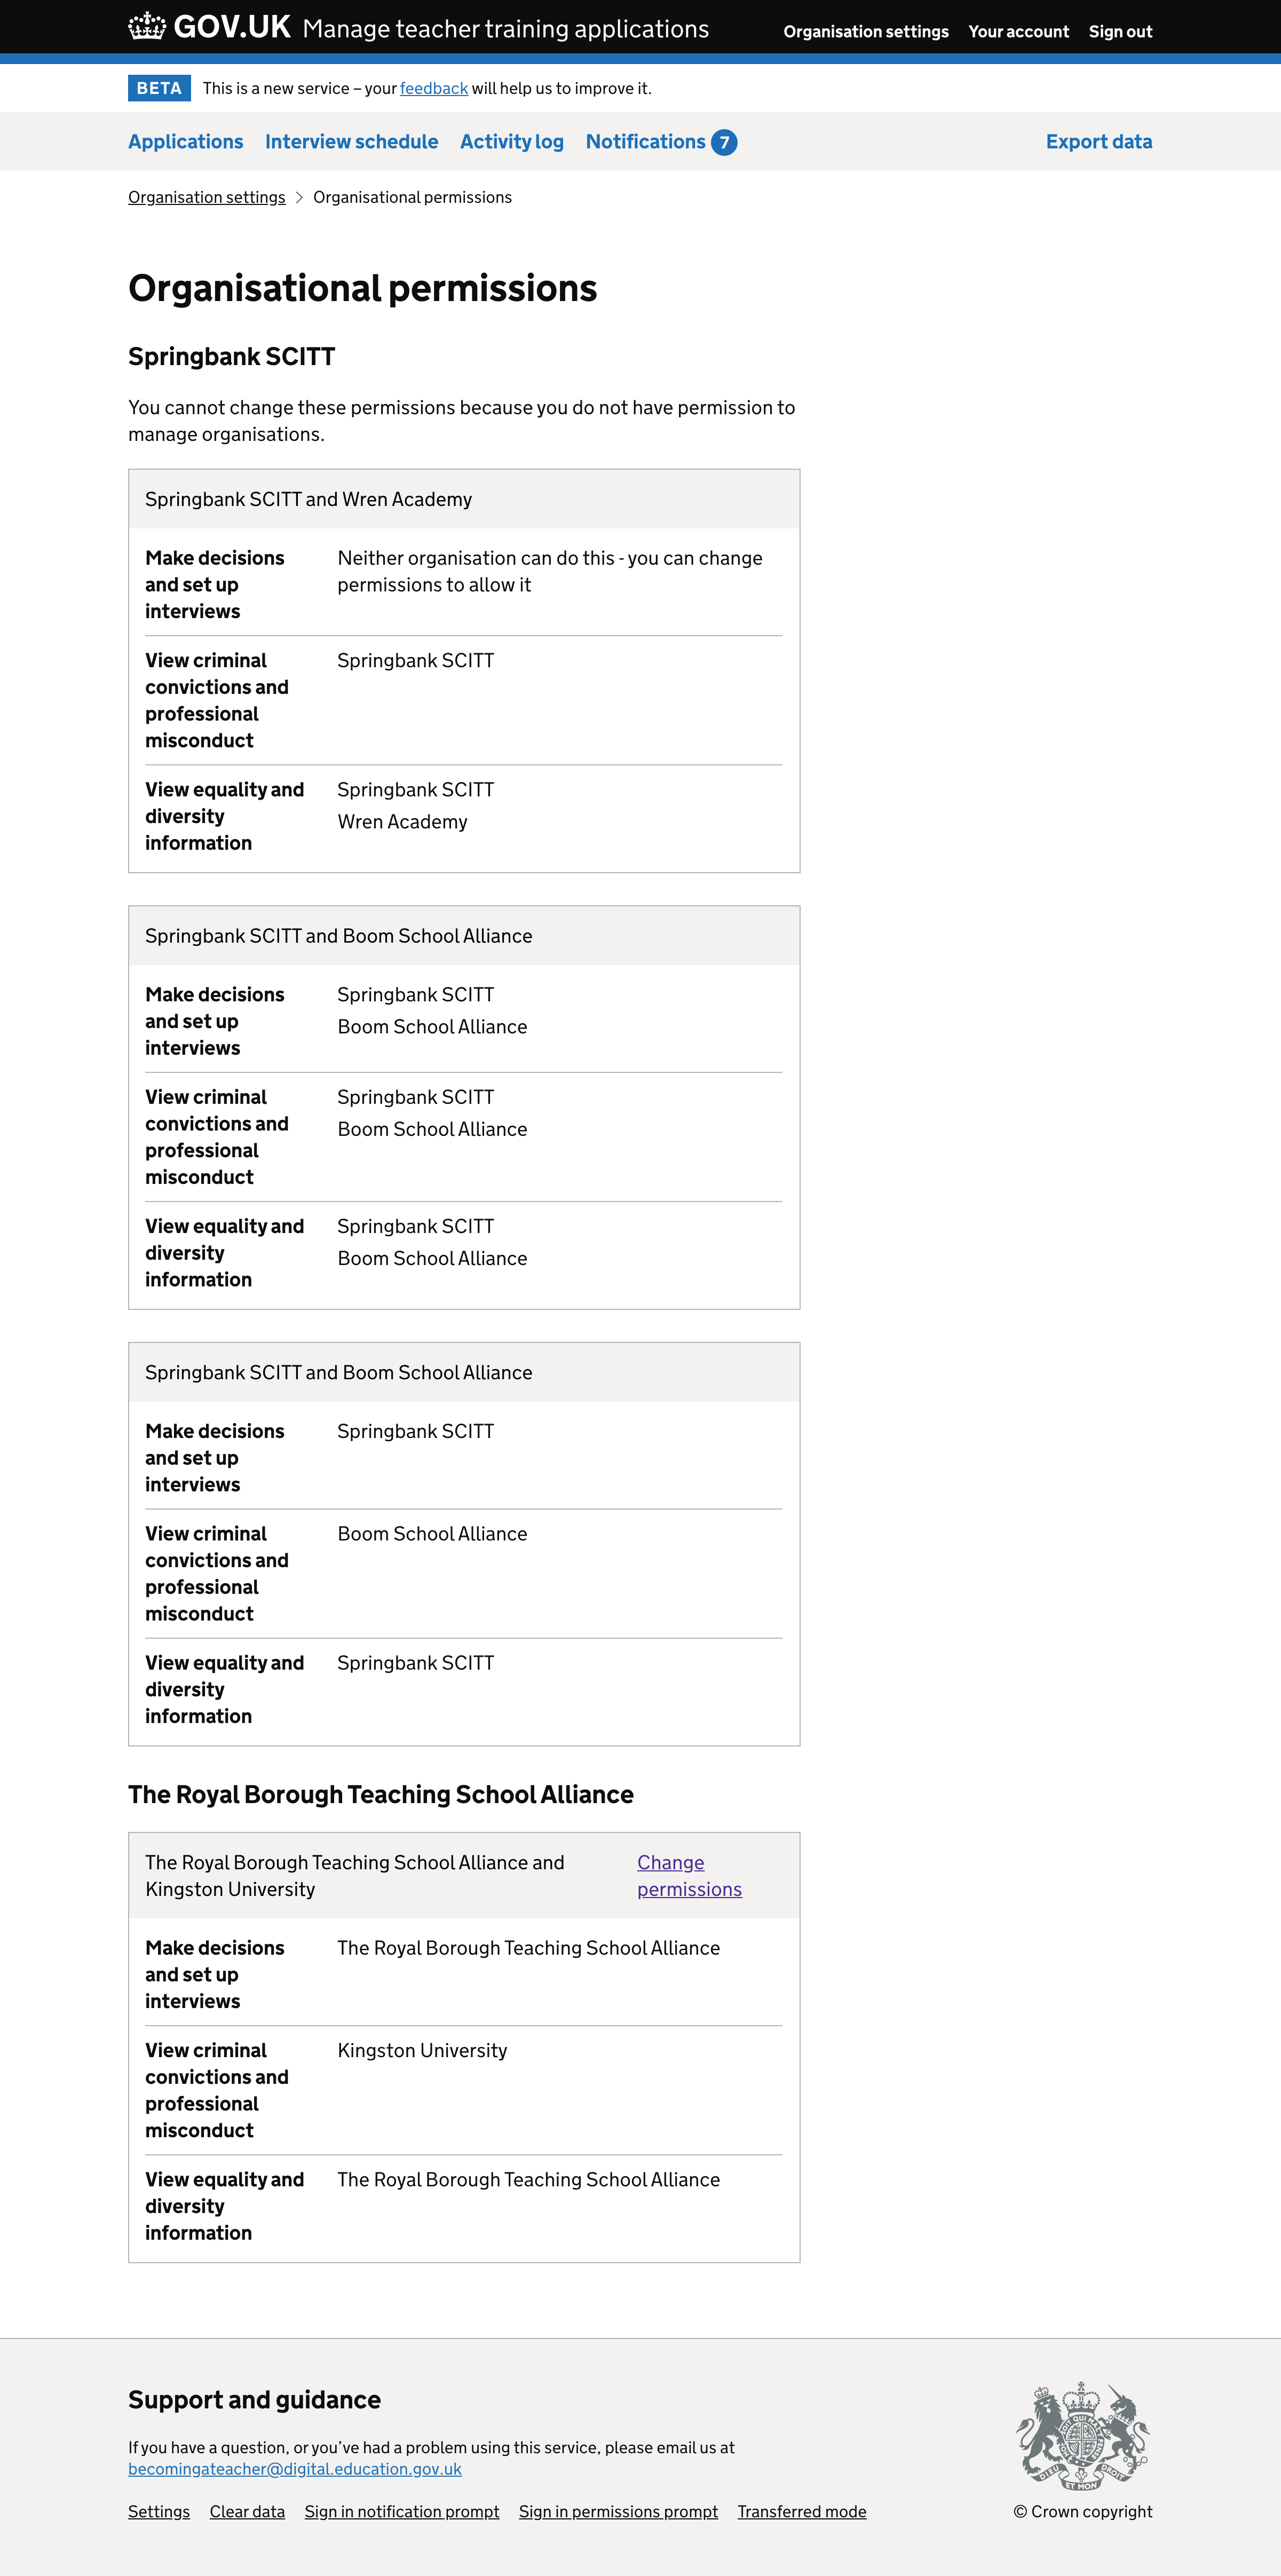 Screenshot of organisational permissions page.